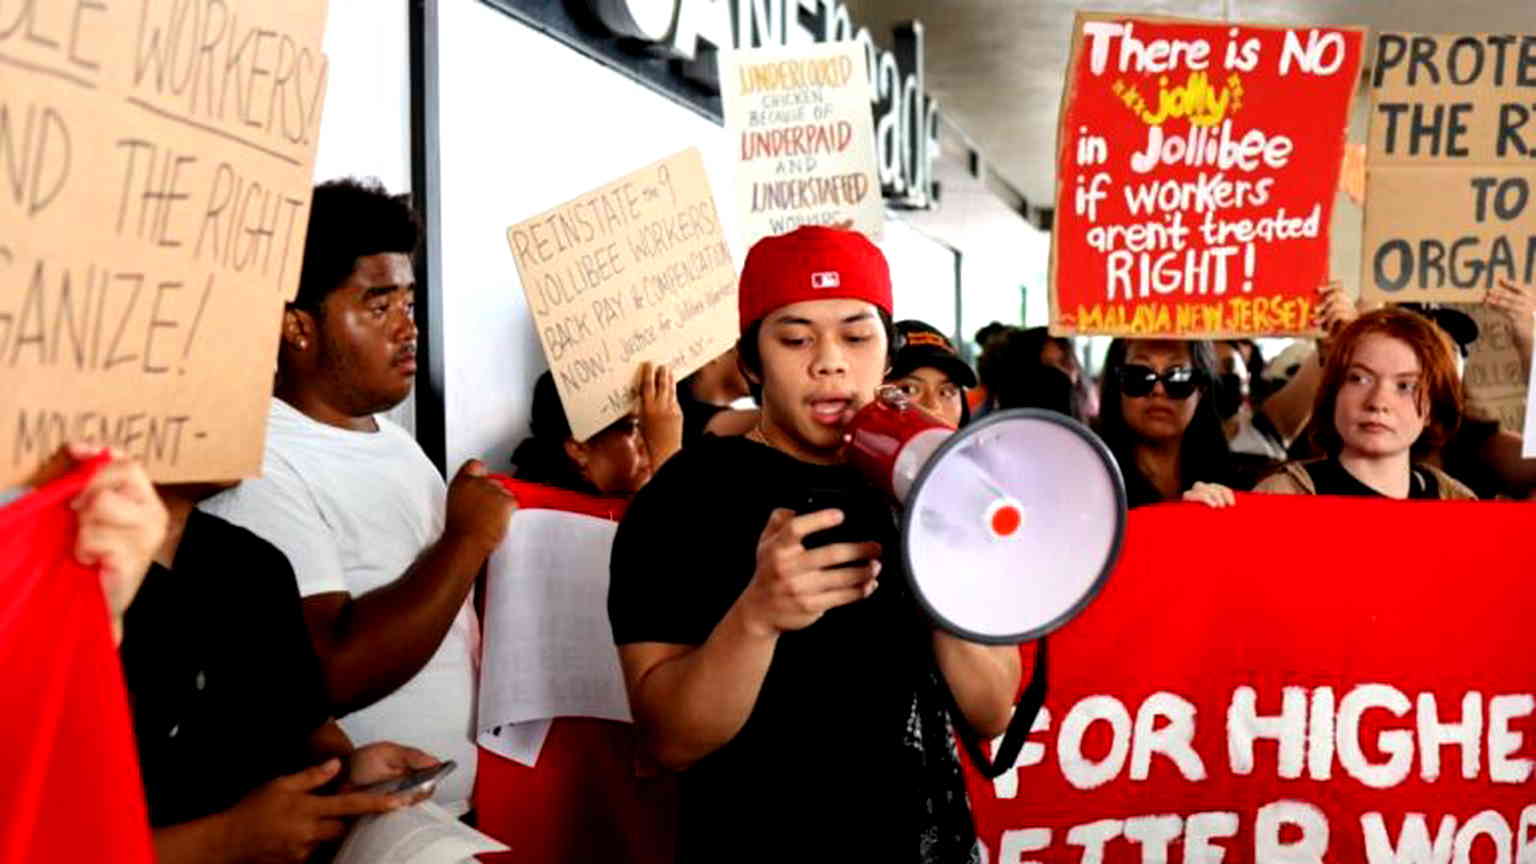 Jollibee ex-employees stage protest over alleged illegal firings at New Jersey branch